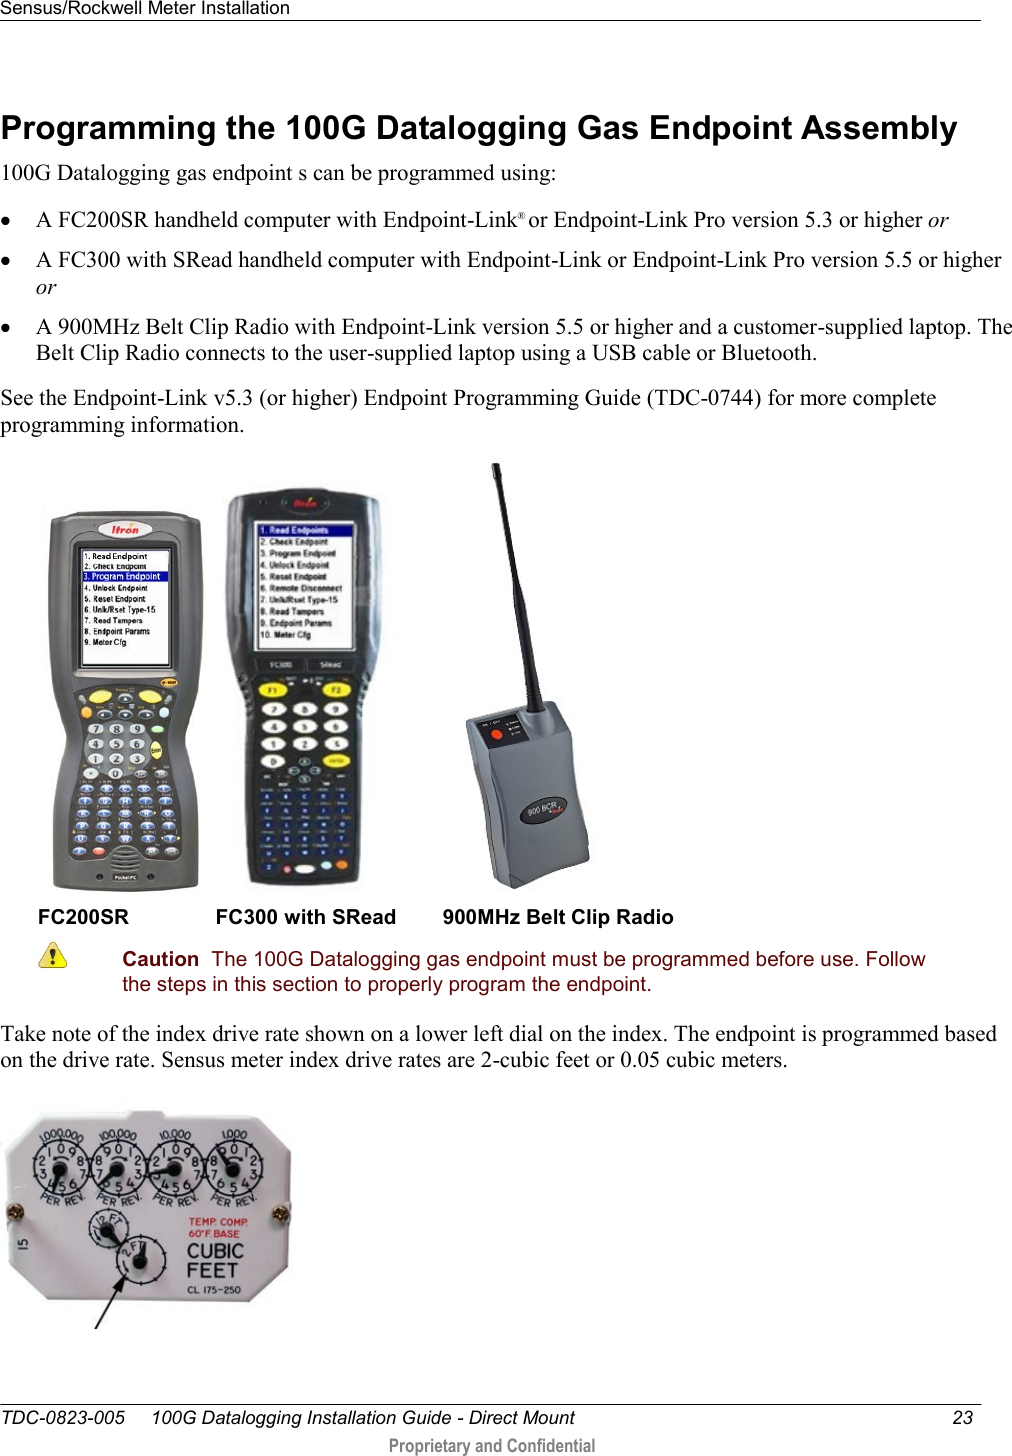 Sensus/Rockwell Meter Installation   TDC-0823-005     100G Datalogging Installation Guide - Direct Mount  23   Proprietary and Confidential     Programming the 100G Datalogging Gas Endpoint Assembly 100G Datalogging gas endpoint s can be programmed using:  A FC200SR handheld computer with Endpoint-Link® or Endpoint-Link Pro version 5.3 or higher or  A FC300 with SRead handheld computer with Endpoint-Link or Endpoint-Link Pro version 5.5 or higher or  A 900MHz Belt Clip Radio with Endpoint-Link version 5.5 or higher and a customer-supplied laptop. The Belt Clip Radio connects to the user-supplied laptop using a USB cable or Bluetooth. See the Endpoint-Link v5.3 (or higher) Endpoint Programming Guide (TDC-0744) for more complete programming information.      FC200SR               FC300 with SRead        900MHz Belt Clip Radio  Caution  The 100G Datalogging gas endpoint must be programmed before use. Follow the steps in this section to properly program the endpoint.  Take note of the index drive rate shown on a lower left dial on the index. The endpoint is programmed based on the drive rate. Sensus meter index drive rates are 2-cubic feet or 0.05 cubic meters.    